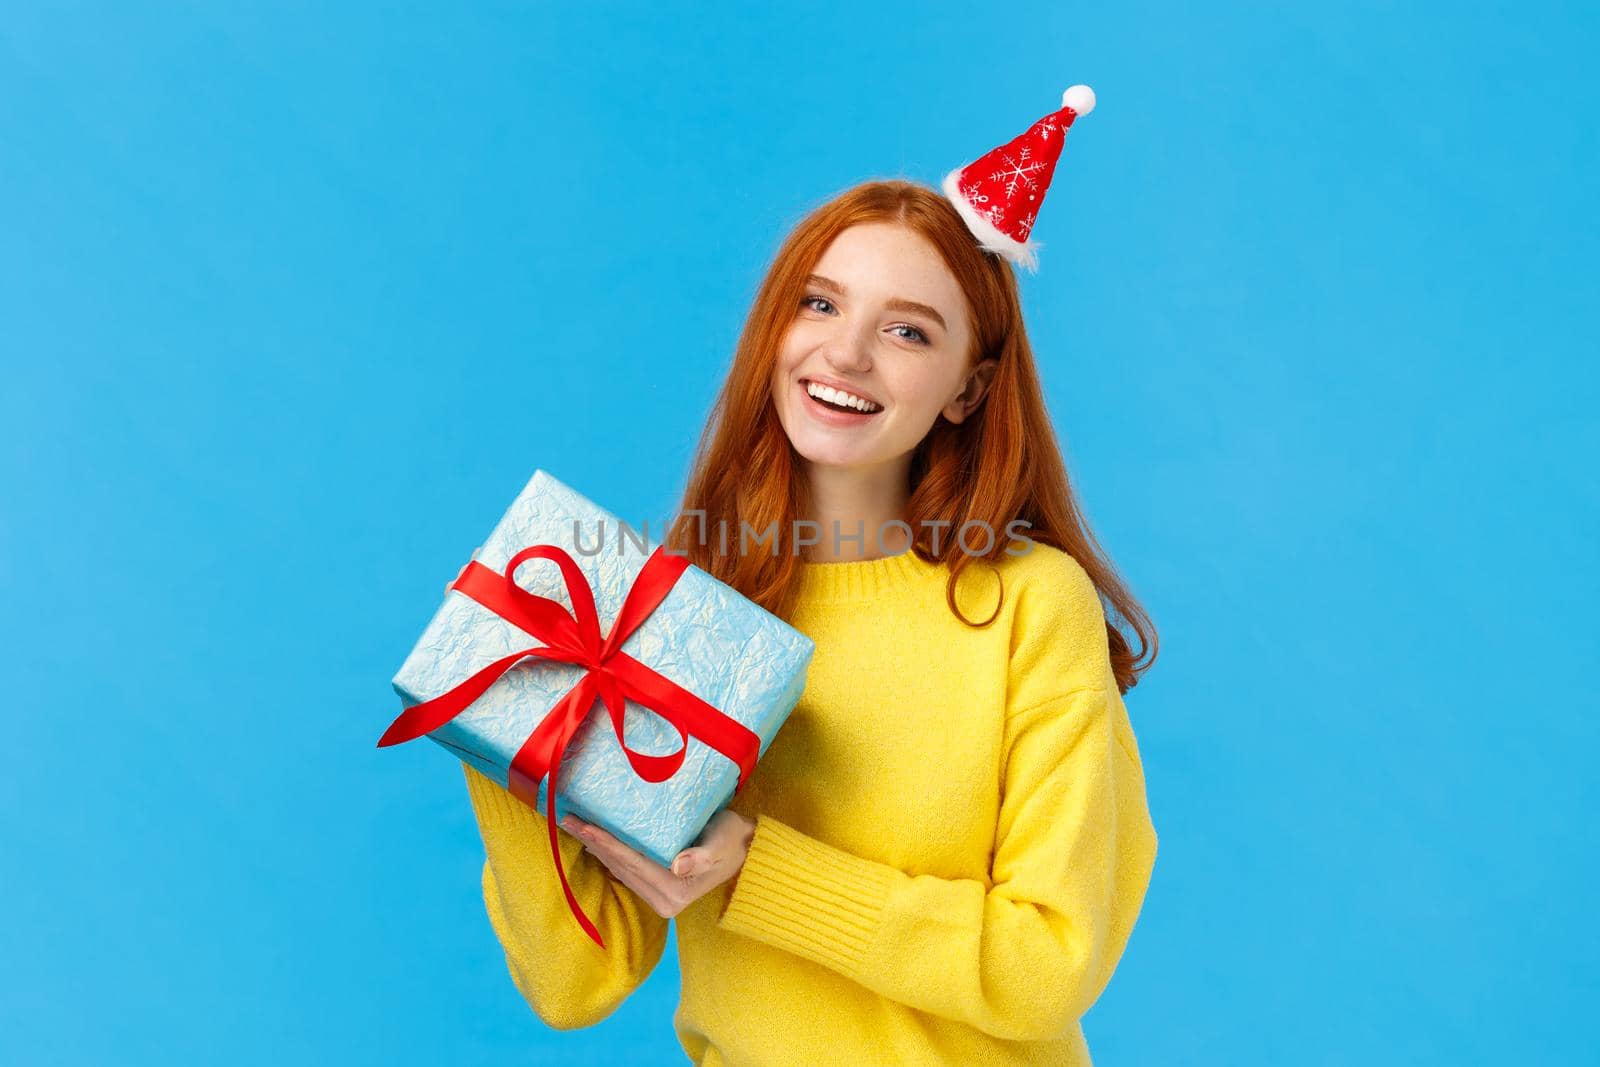 Holidays, celebration and presents concept. Cheerful redhead girl love christmas, enjoy celebrating with friends, receive gift in wrapped box from secret santa, wearing cute hat, blue background.